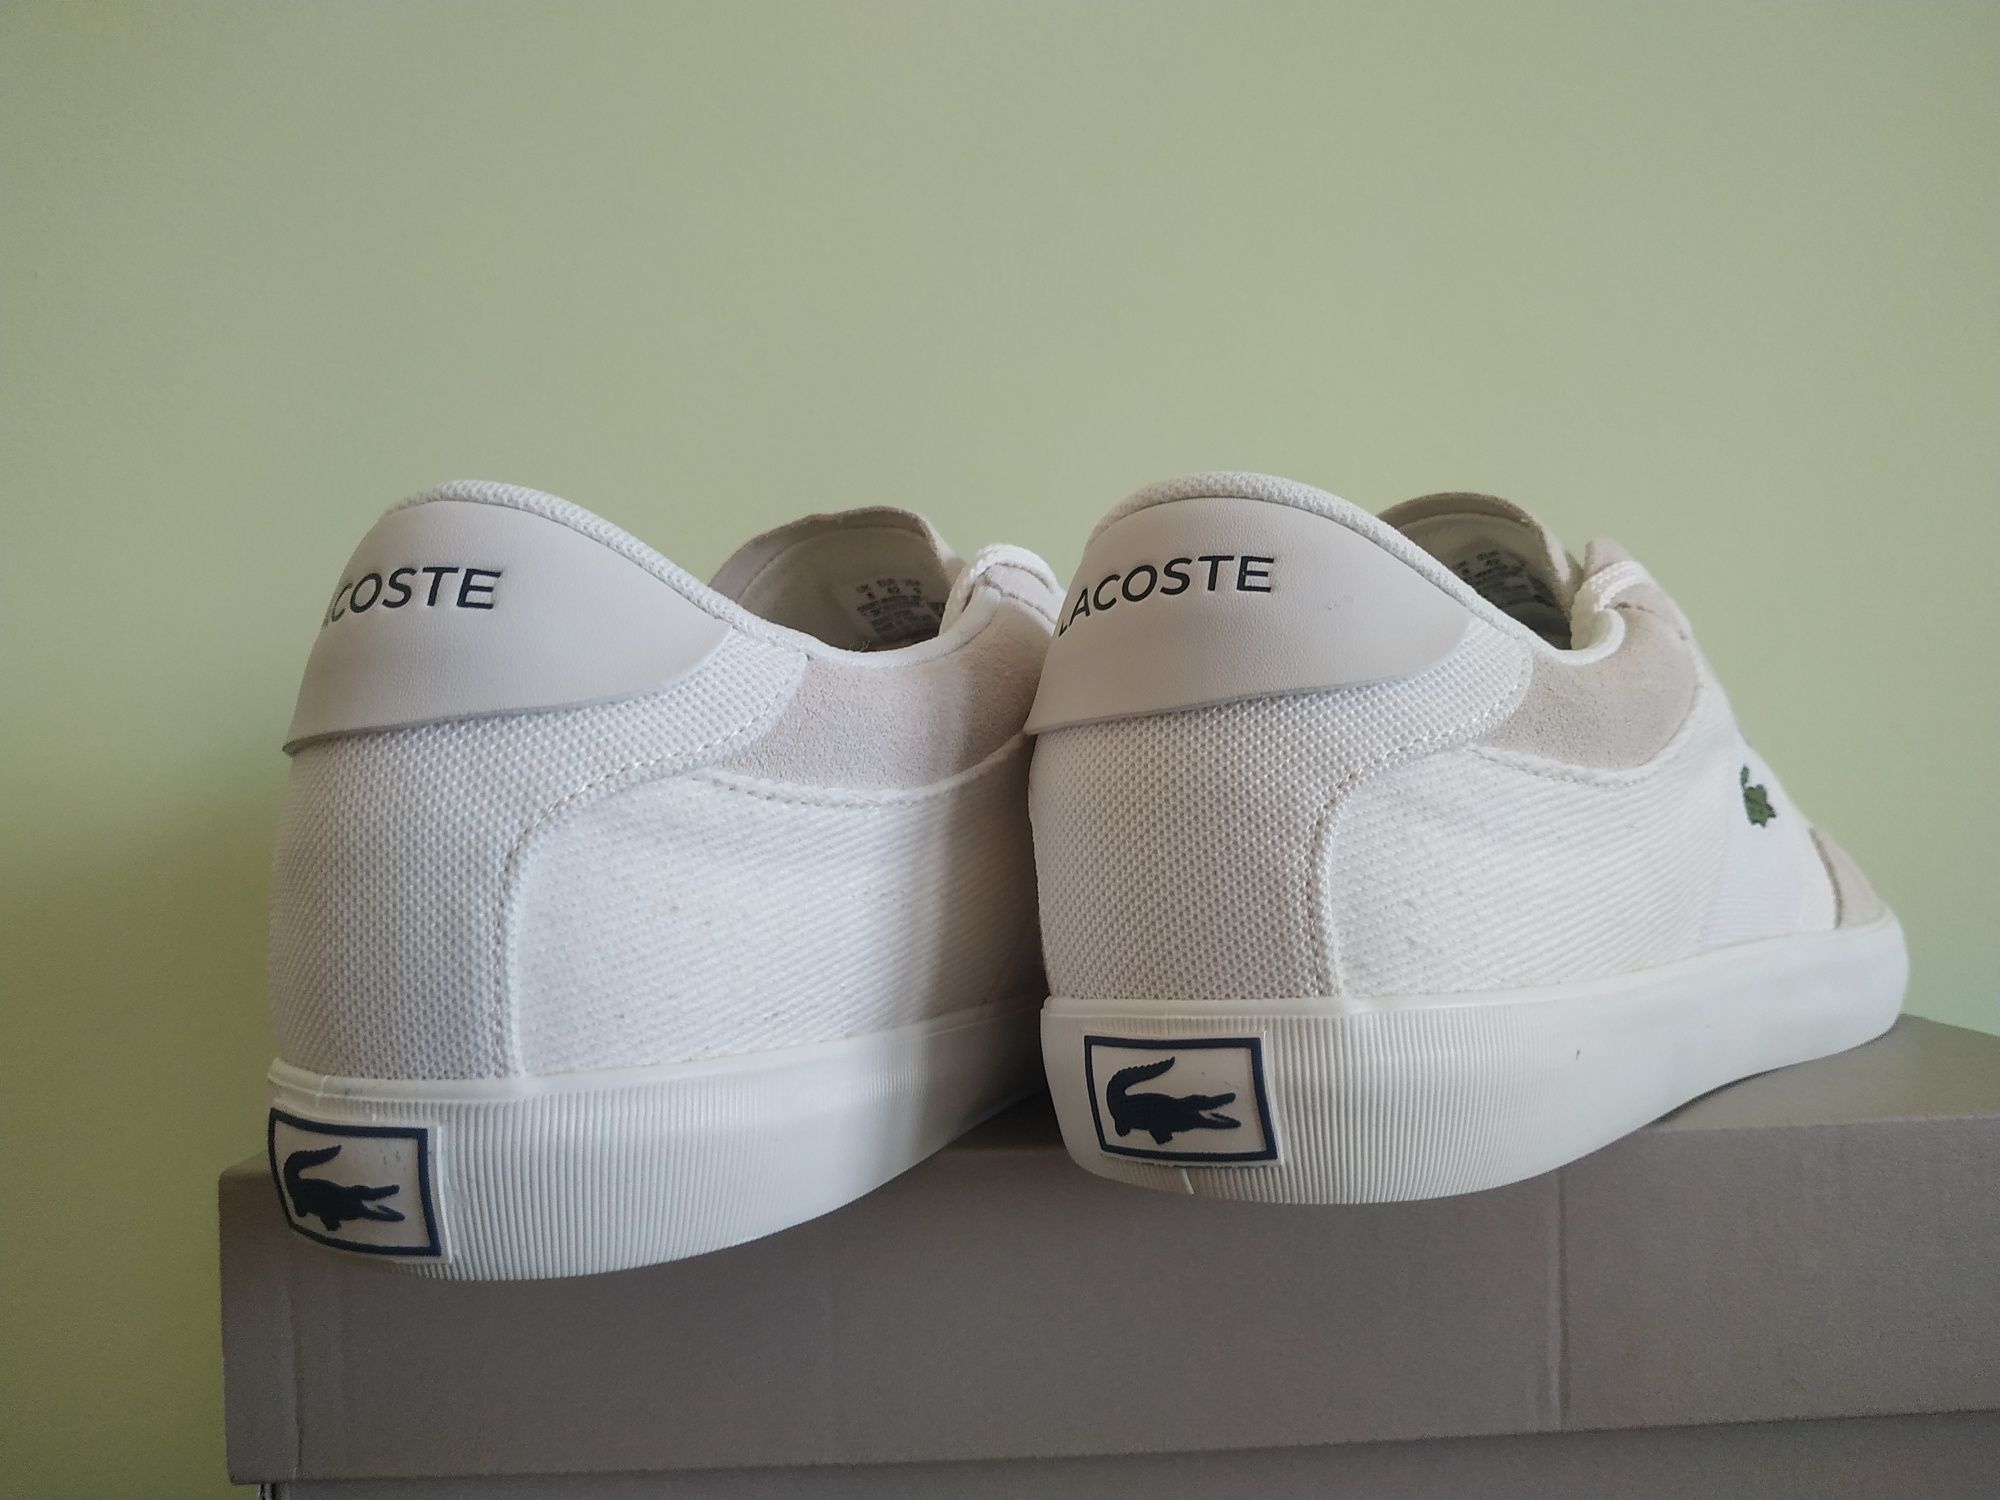 OUTLET! Buty męskie sneakersy Lacoste Court Master 220 1 CMA r.42